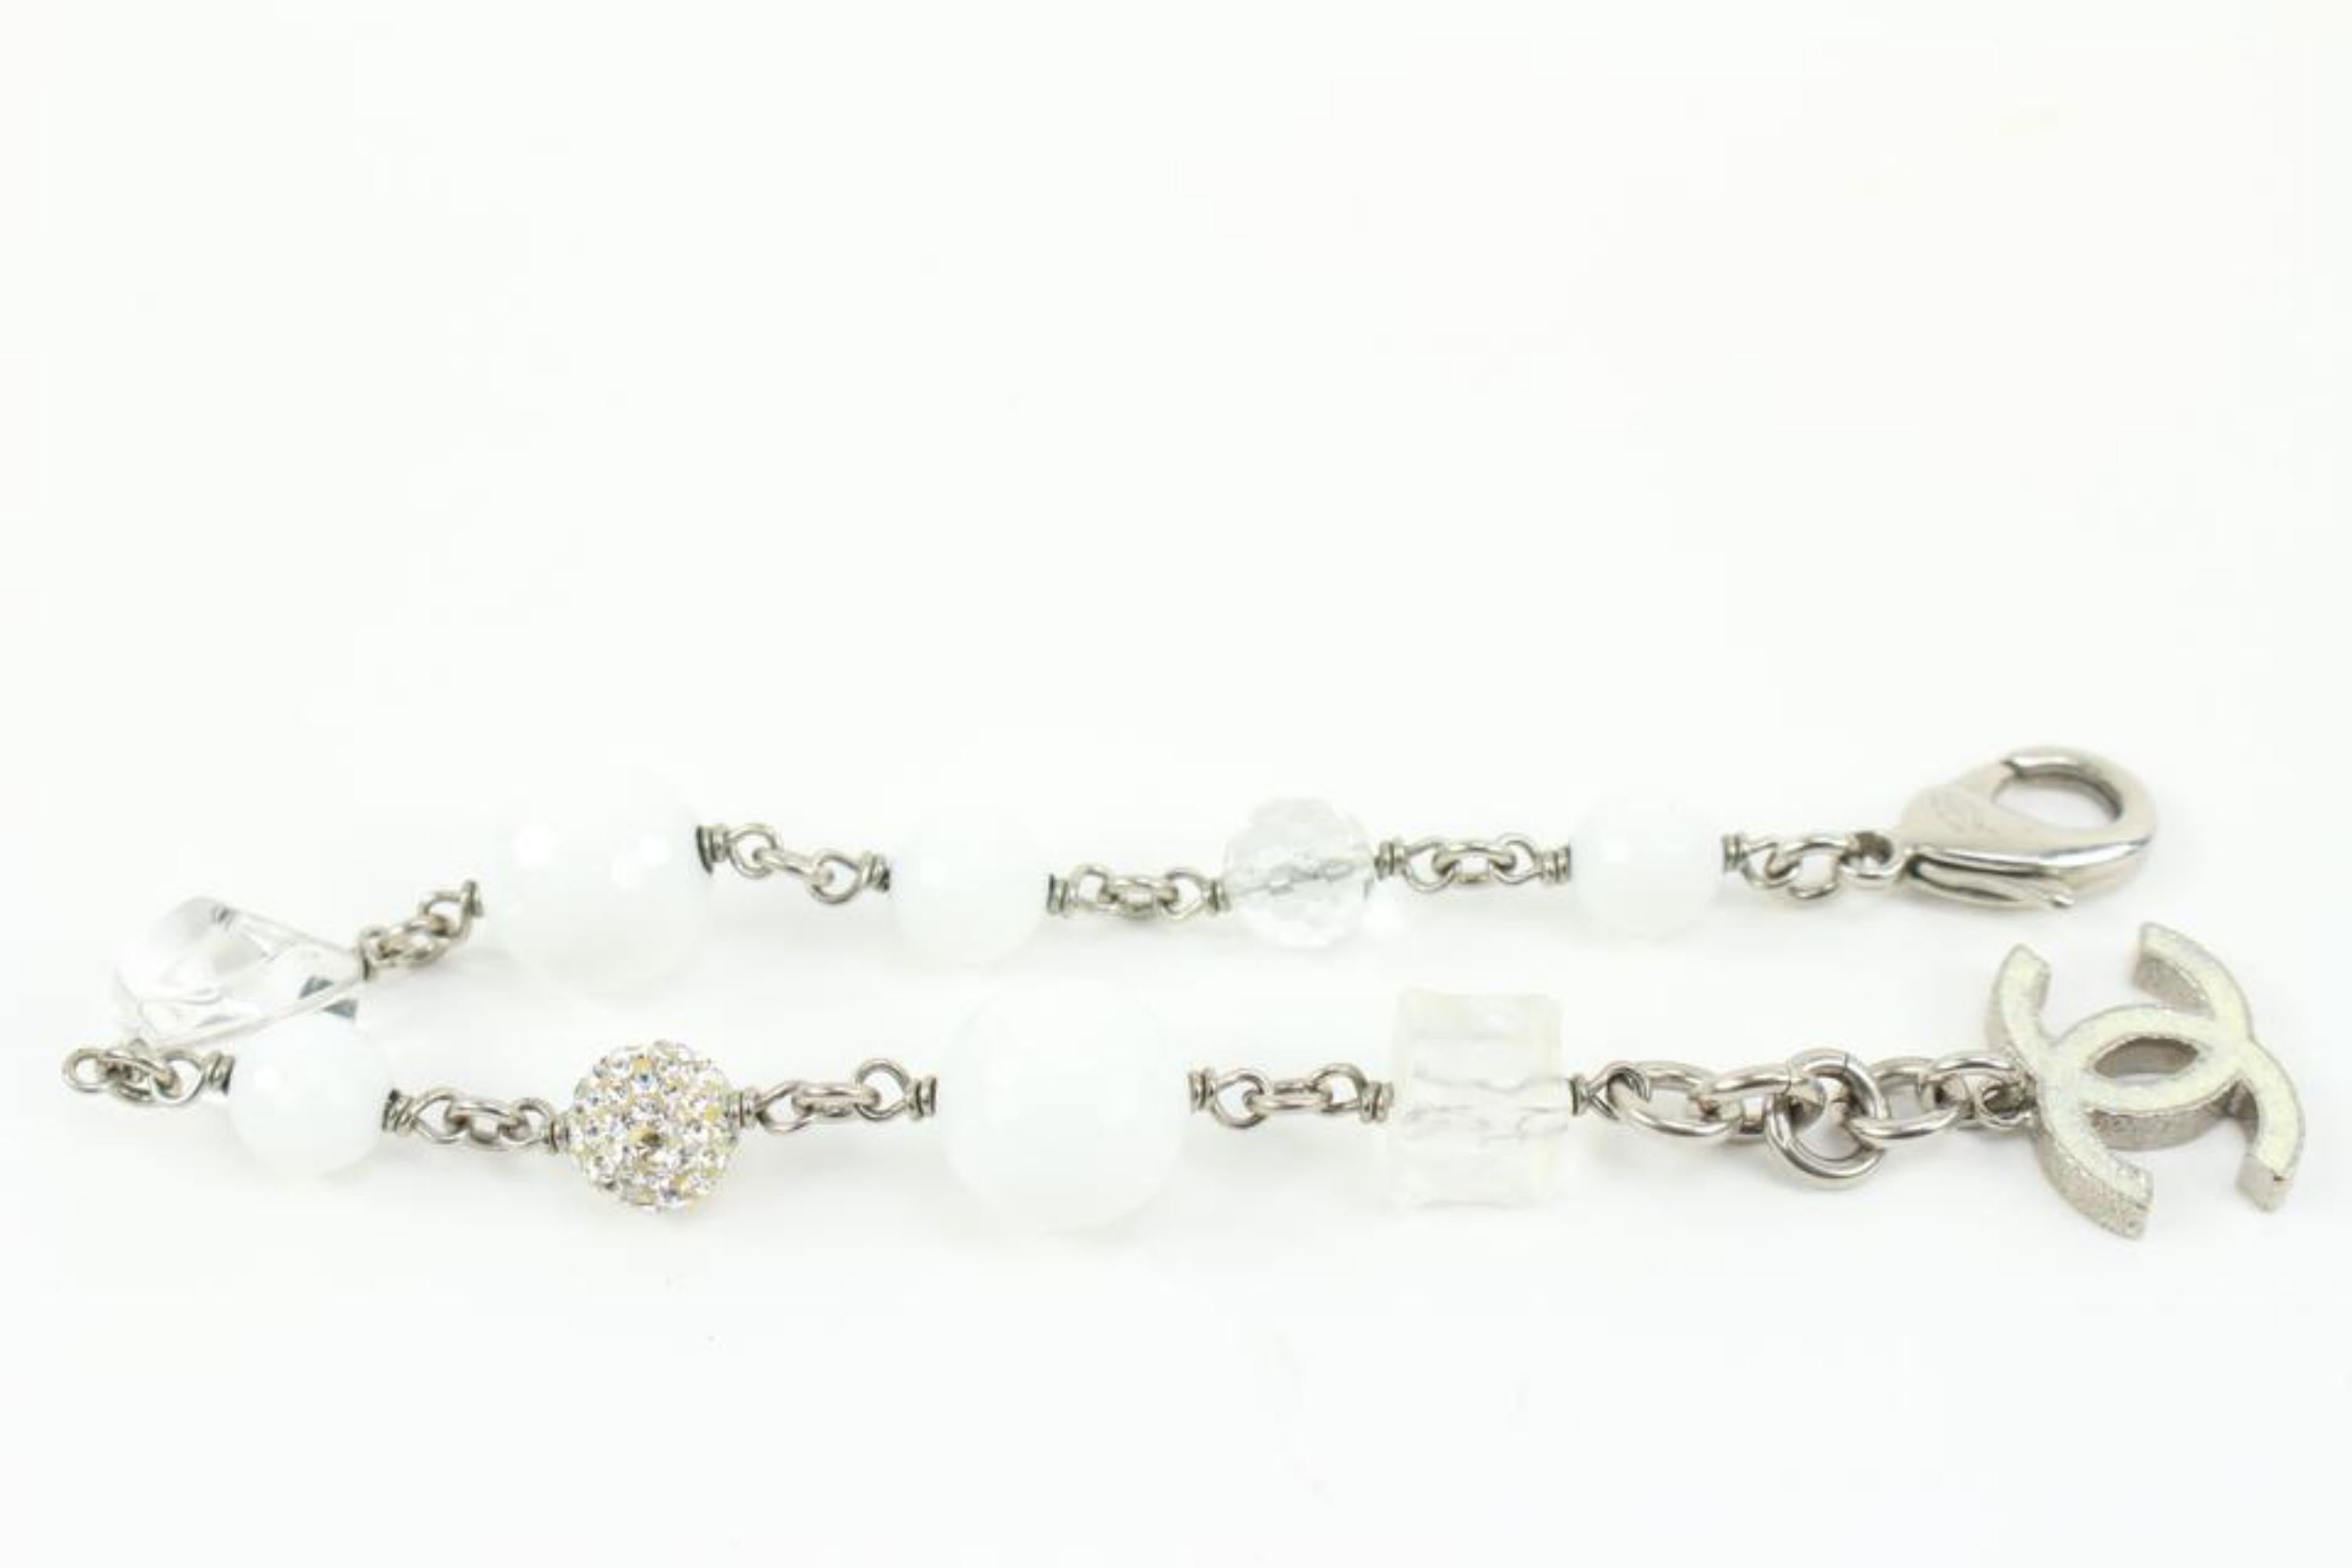 Chanel 10A Crystal x Cube x Pearl Silver Chain Bracelet 14ck311s 5